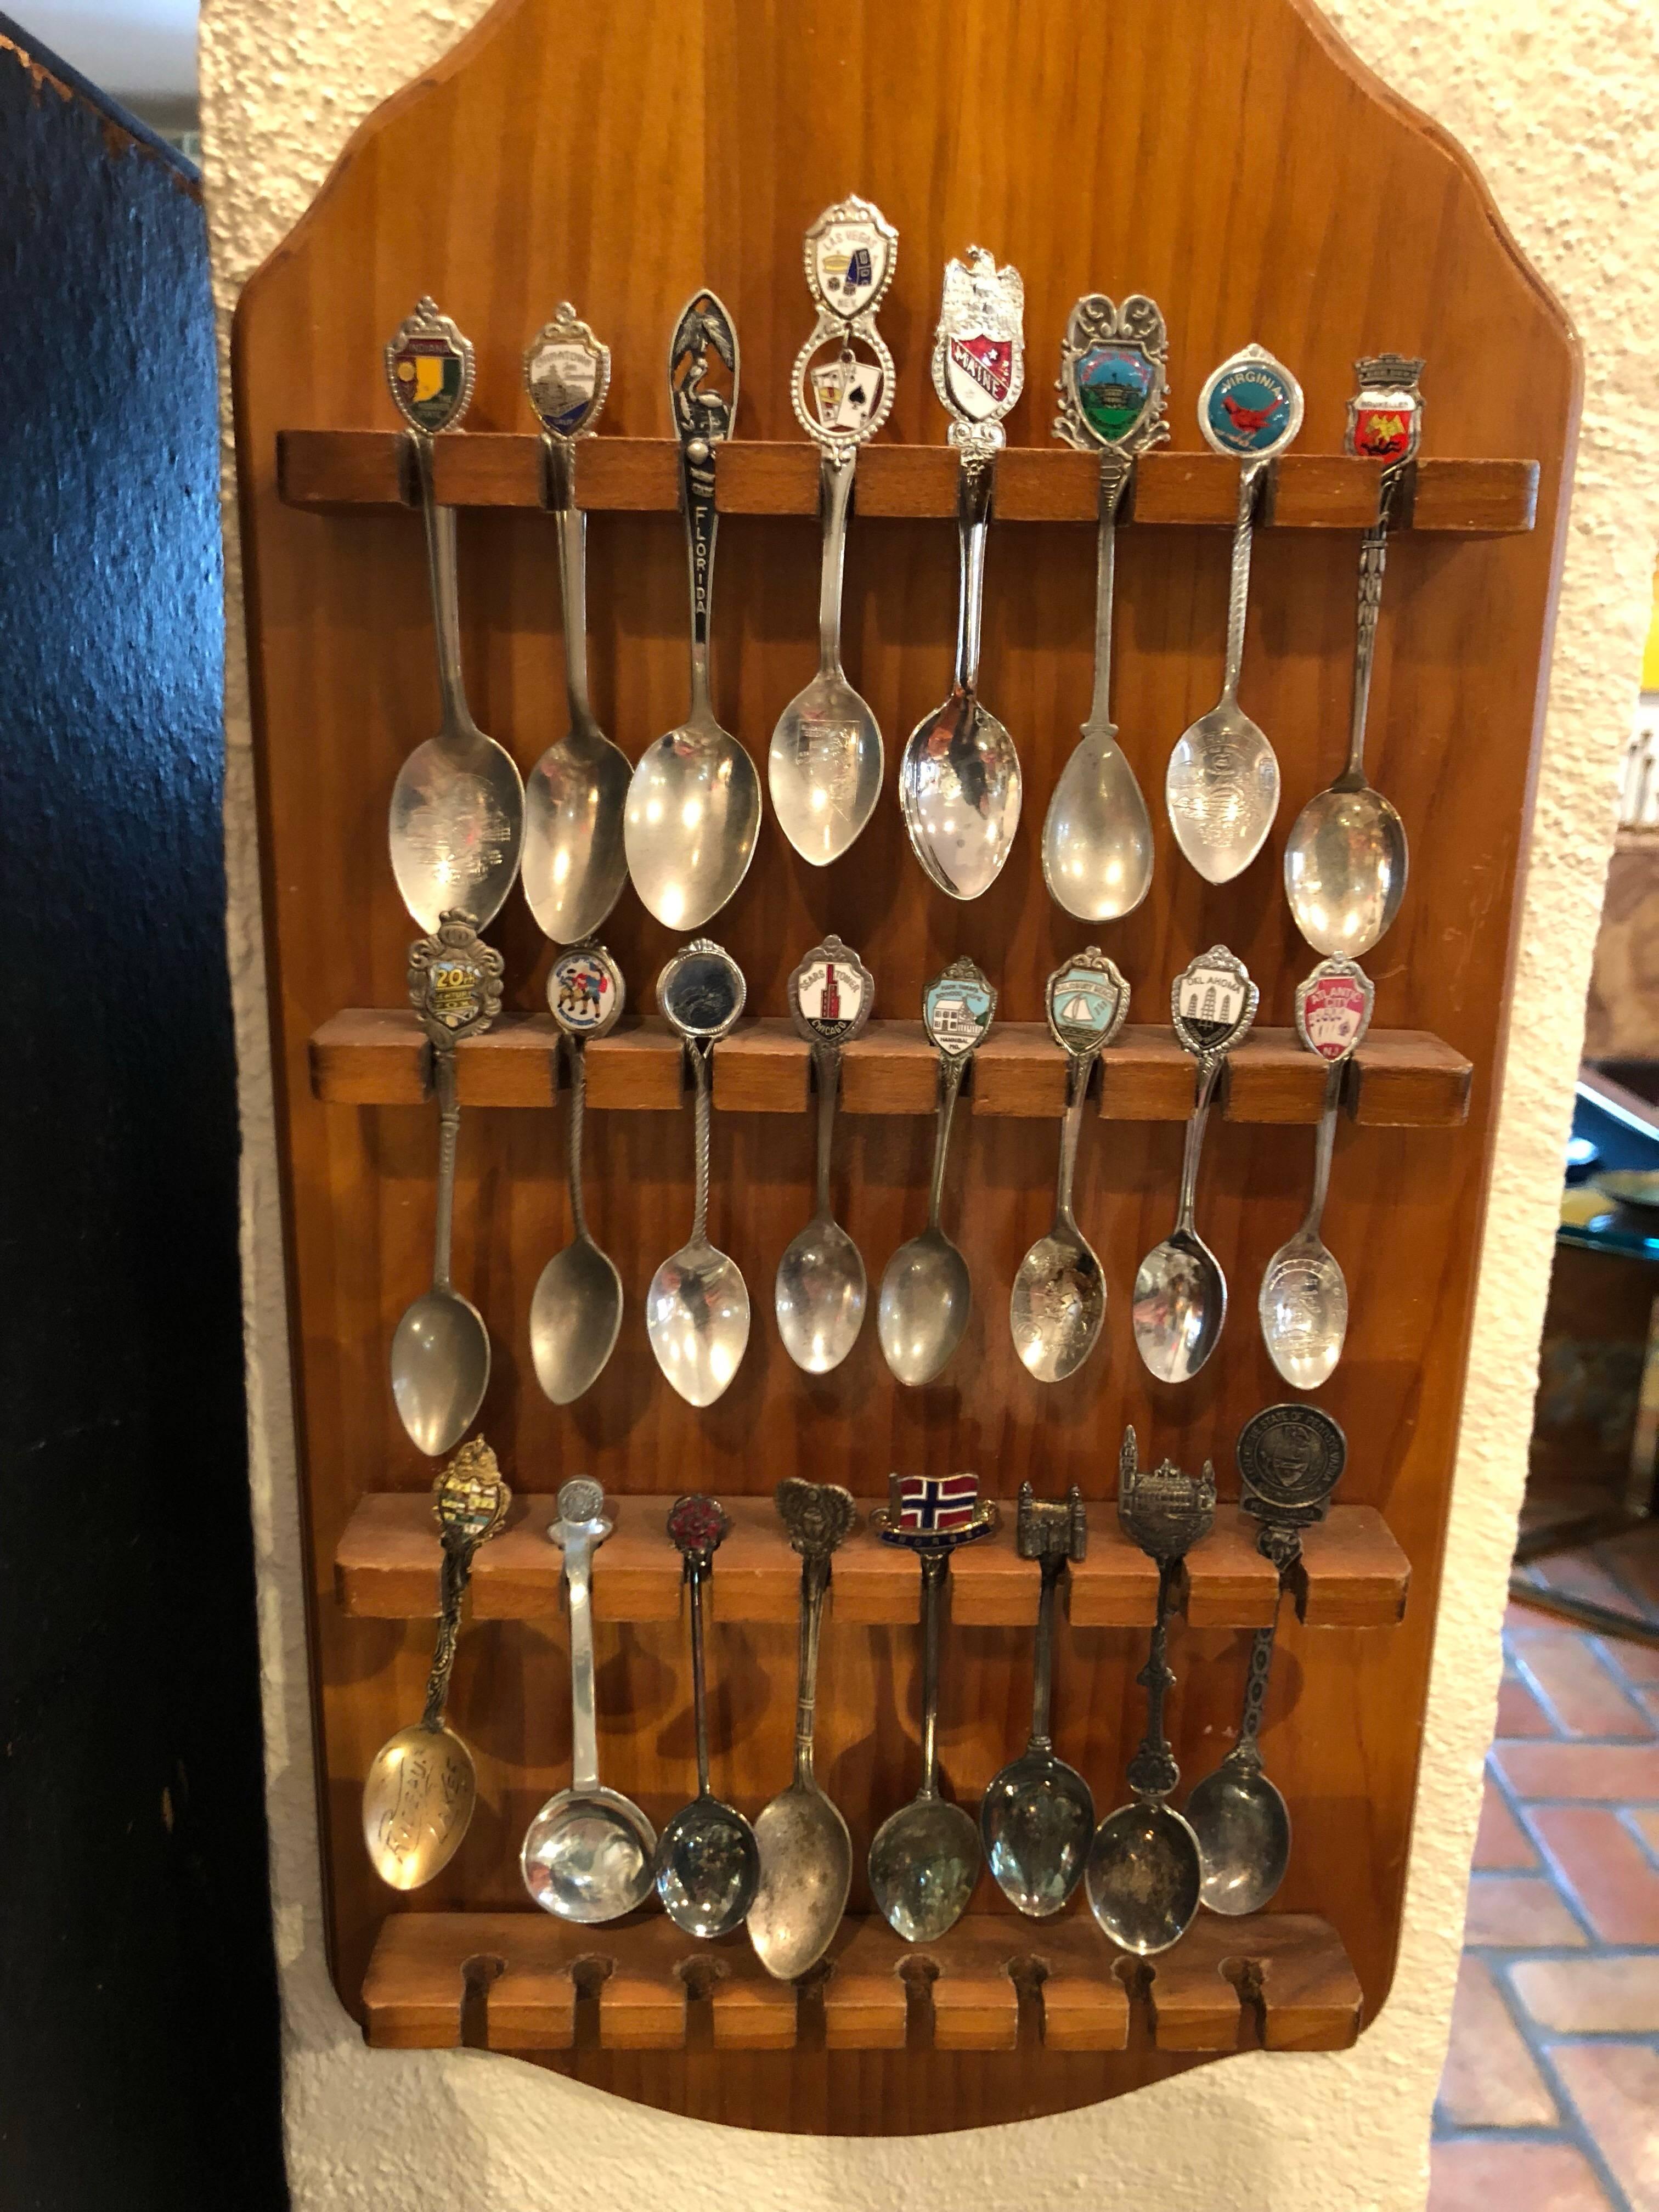 Vintage Tourist Spoon Collection. Collected over many years of traveling . Many sterling and enamel. 24 spoons in total on a nice wooden display board. Perfect gift for a collector.